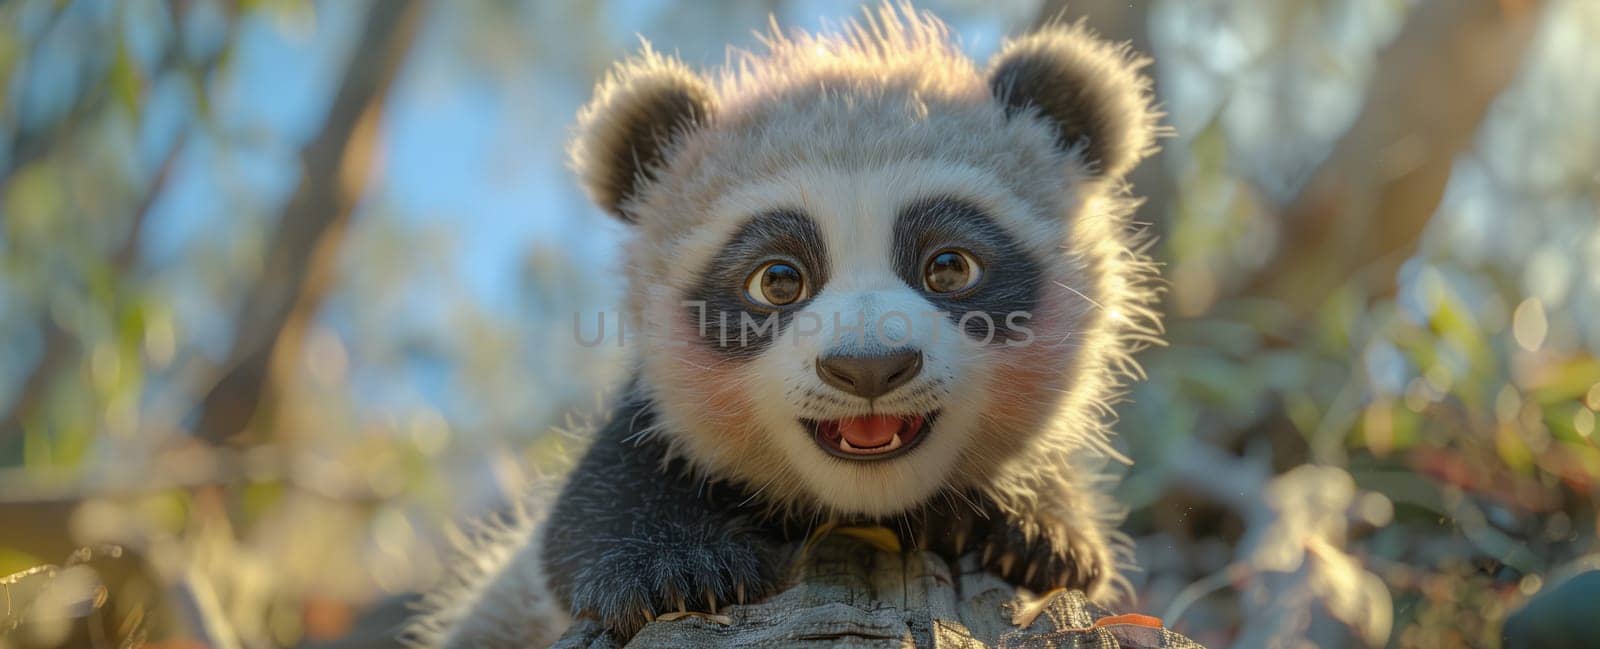 A carnivorous baby panda bear with whiskers is sitting on a rock in the jungle, smiling at the camera. Its fur is fluffy and it looks adorable in the natural landscape